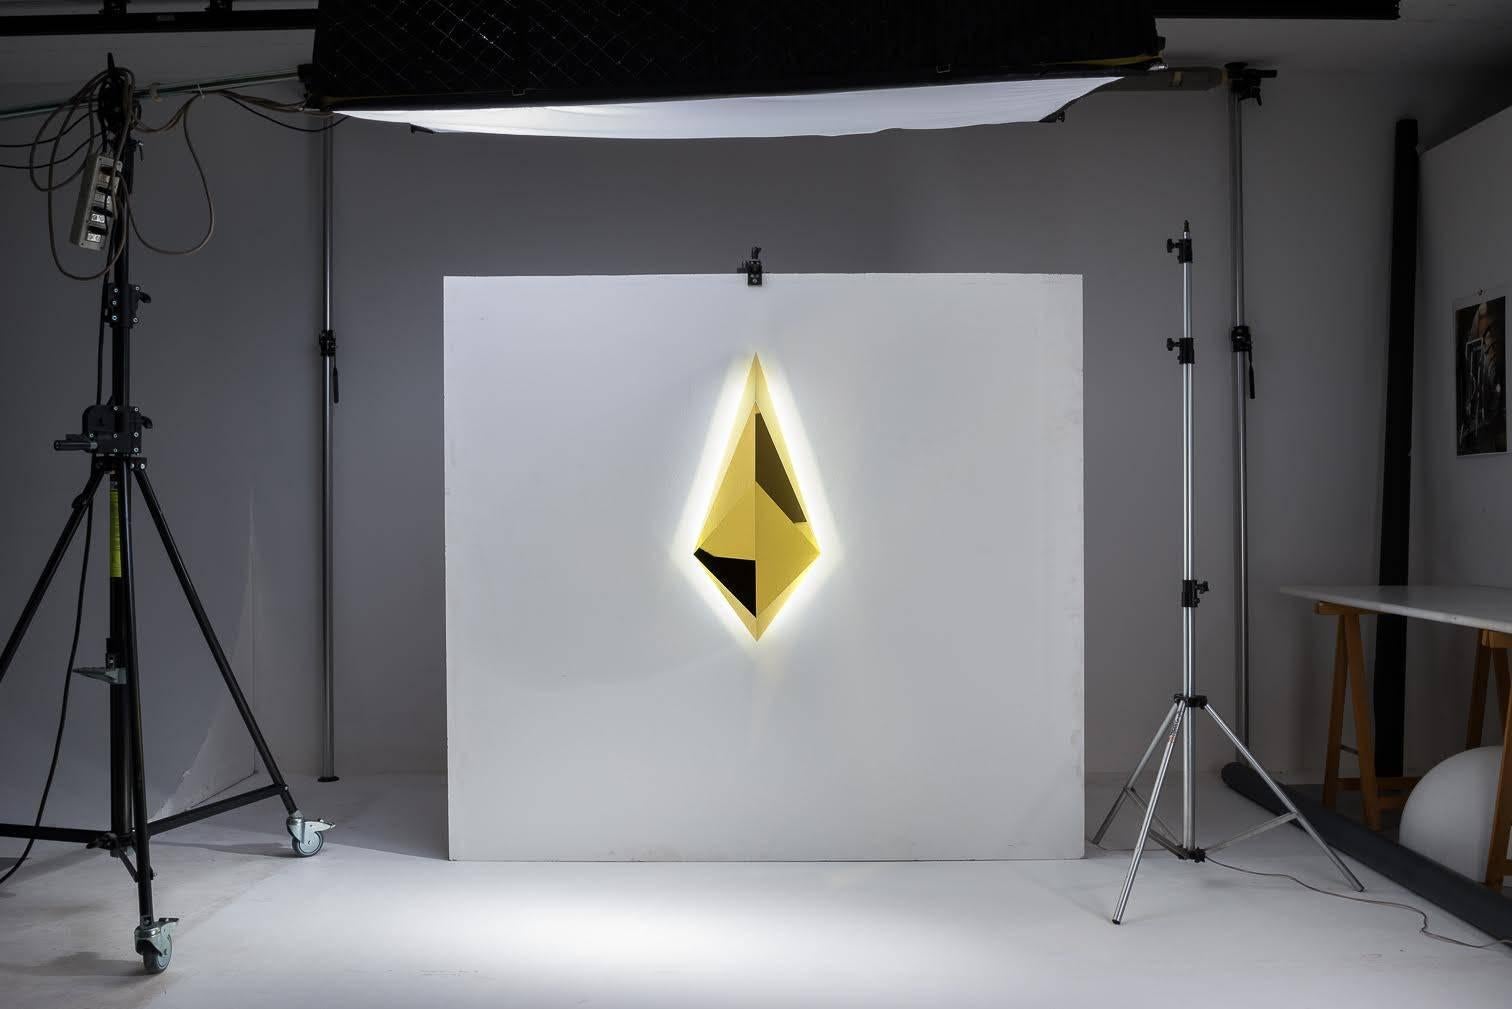 Wall light large, made of brass or aluminum gold finish with LED lighting. Through the study and application of sacred geometry, Gio Minelli creates with her bright work, conditions to induce the mind to silence and contemplation.

Biography
Gio